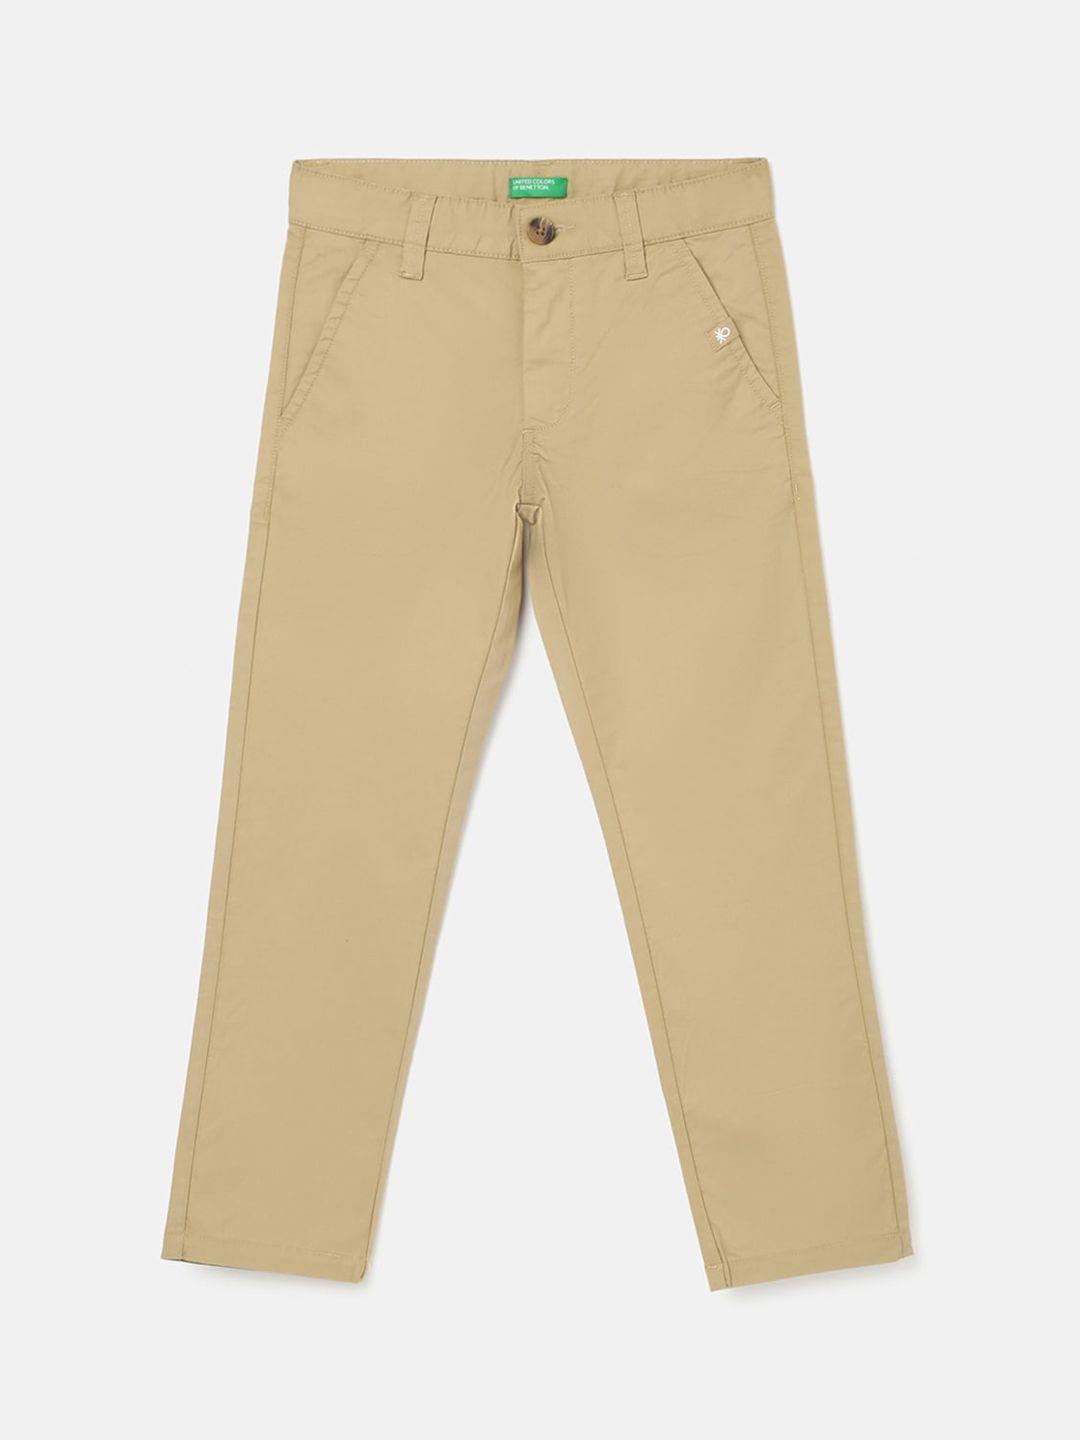 united colors of benetton boys slim fit chinos trousers